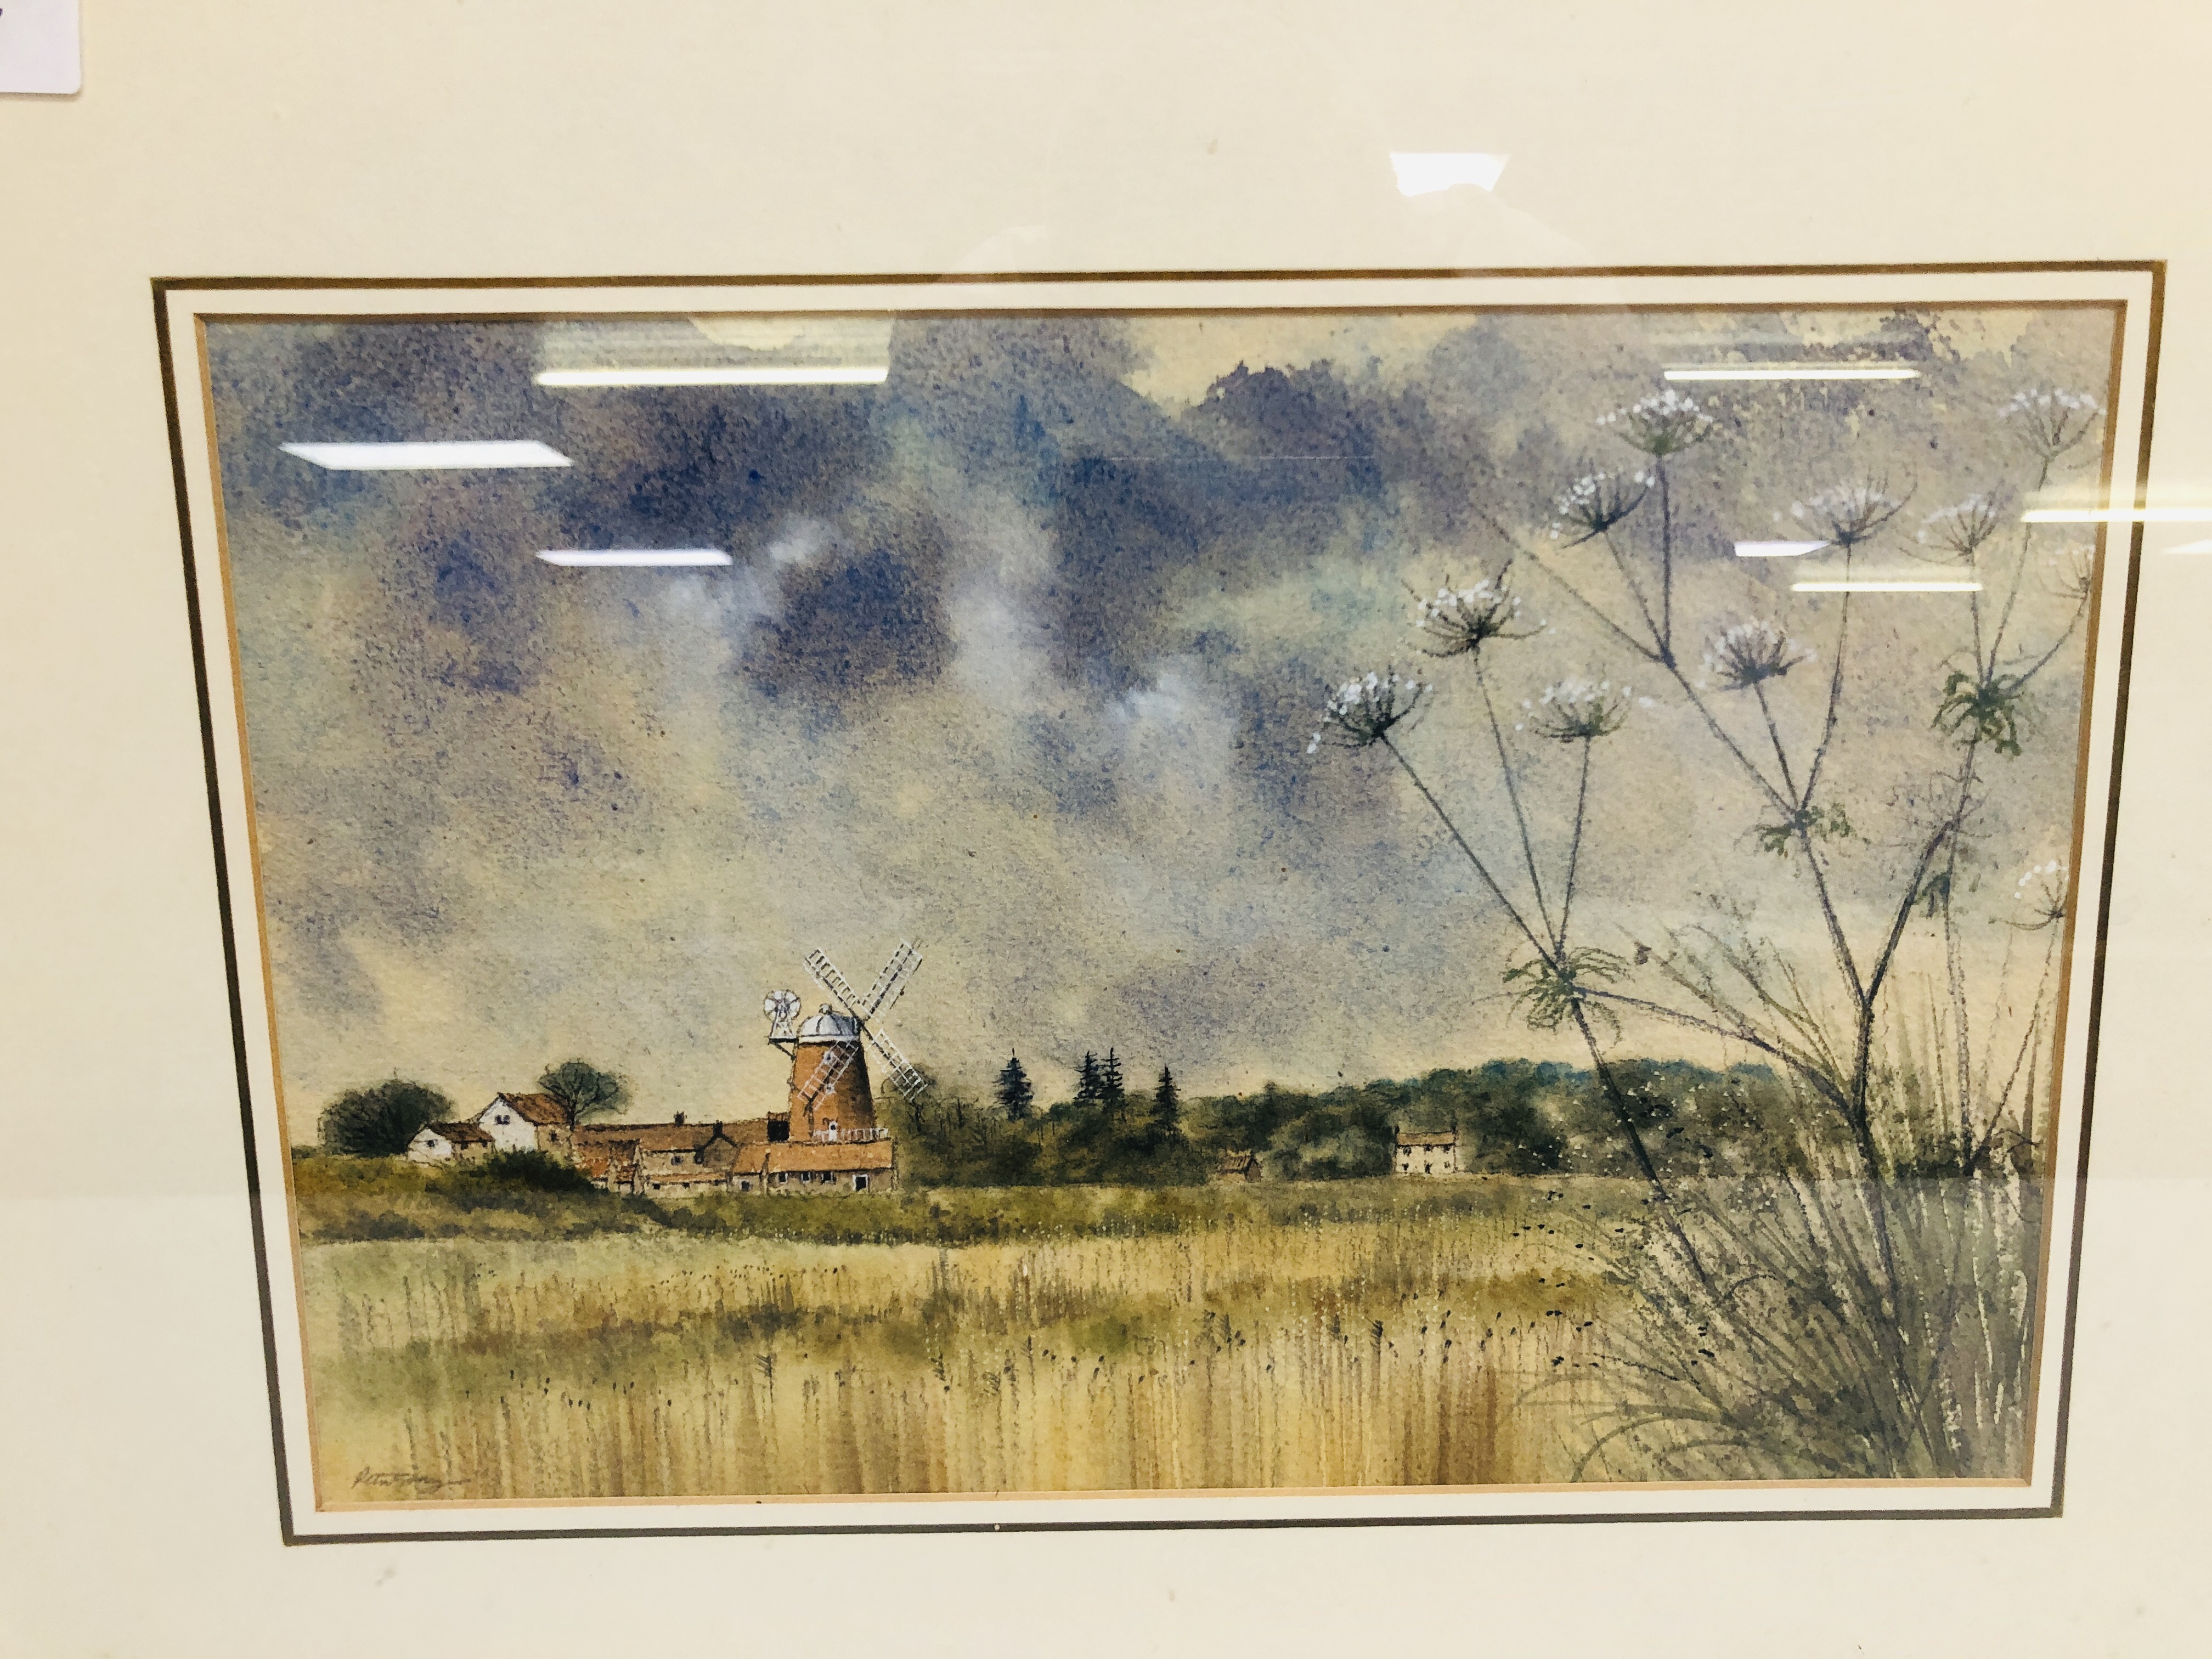 ORIGINAL PETER SOLLY WATERCOLOUR "CLEY MILL" NORFOLK, 23 X 34.5CM. - Image 2 of 4